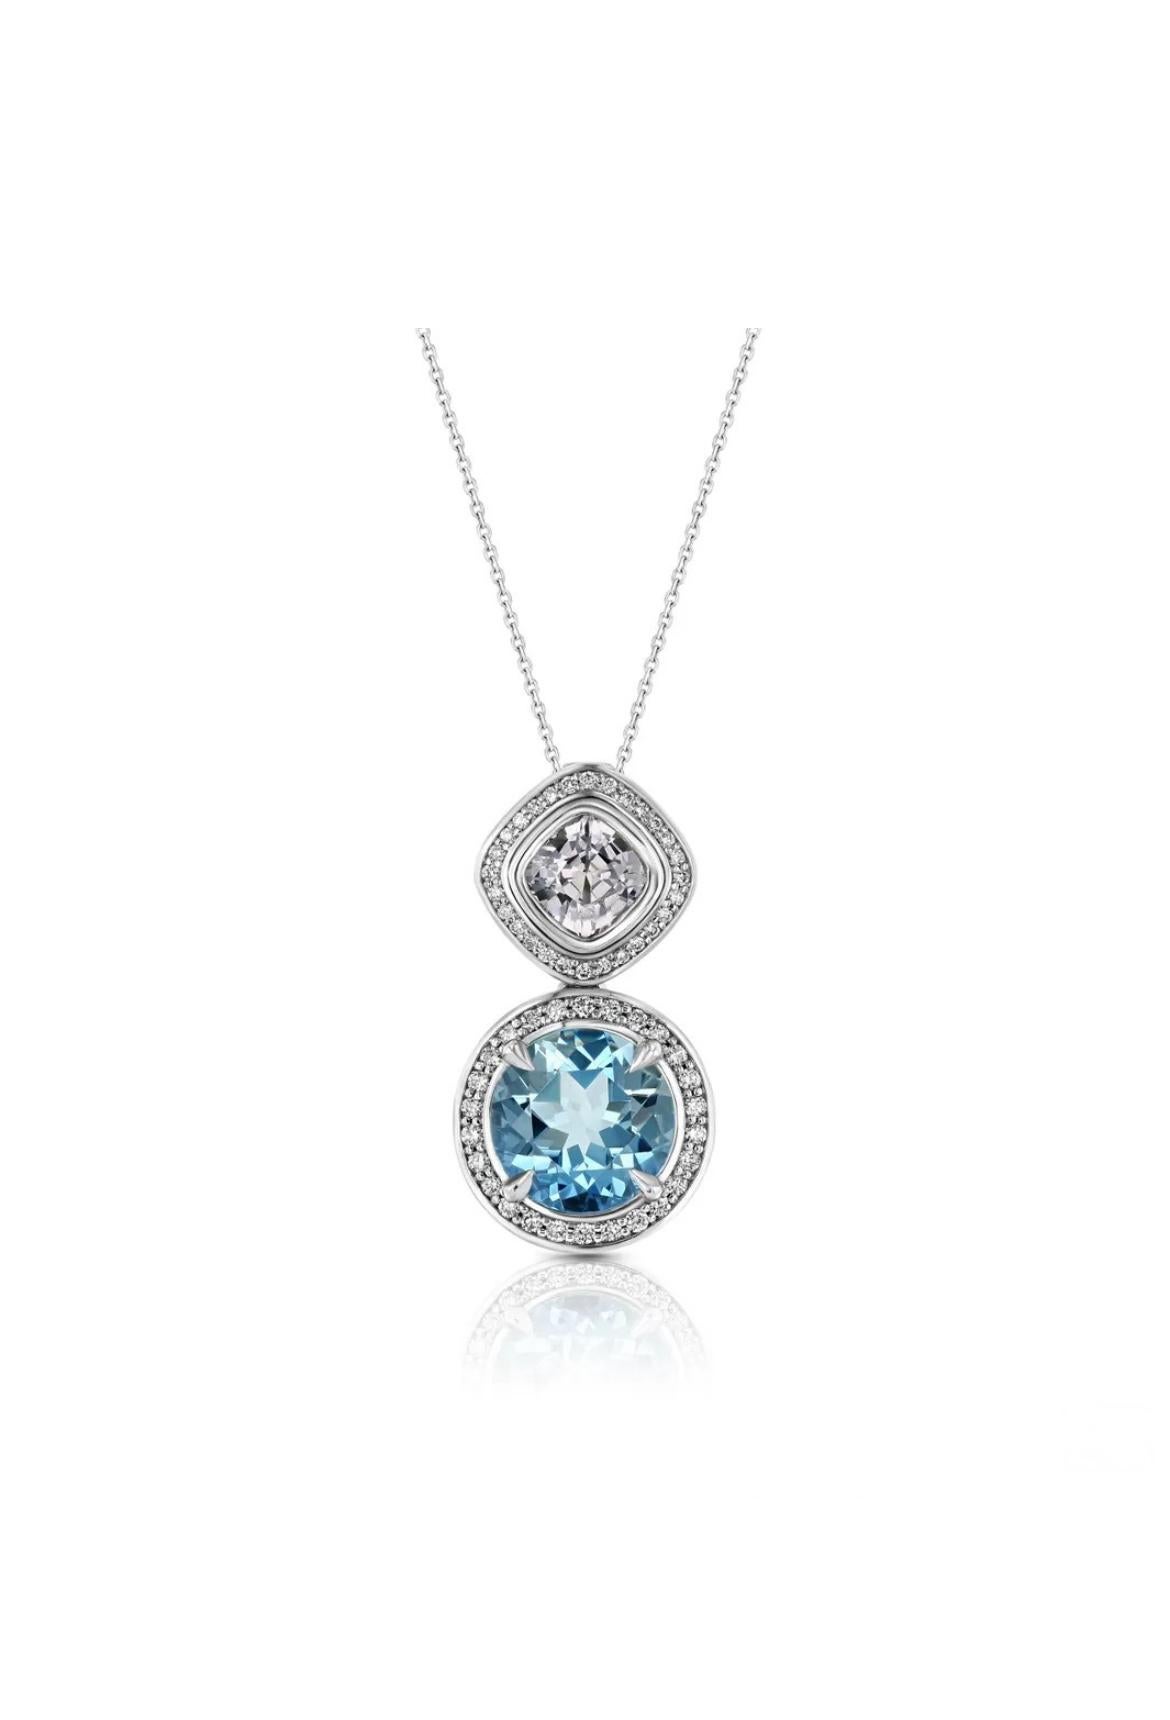 A beauteous 1.22ct cushion-cut lavender spinel shines with a 3.11ct round Aquamarine, encircled with numerous white diamonds totaling 0.31cts in an 18K white gold pendant. 